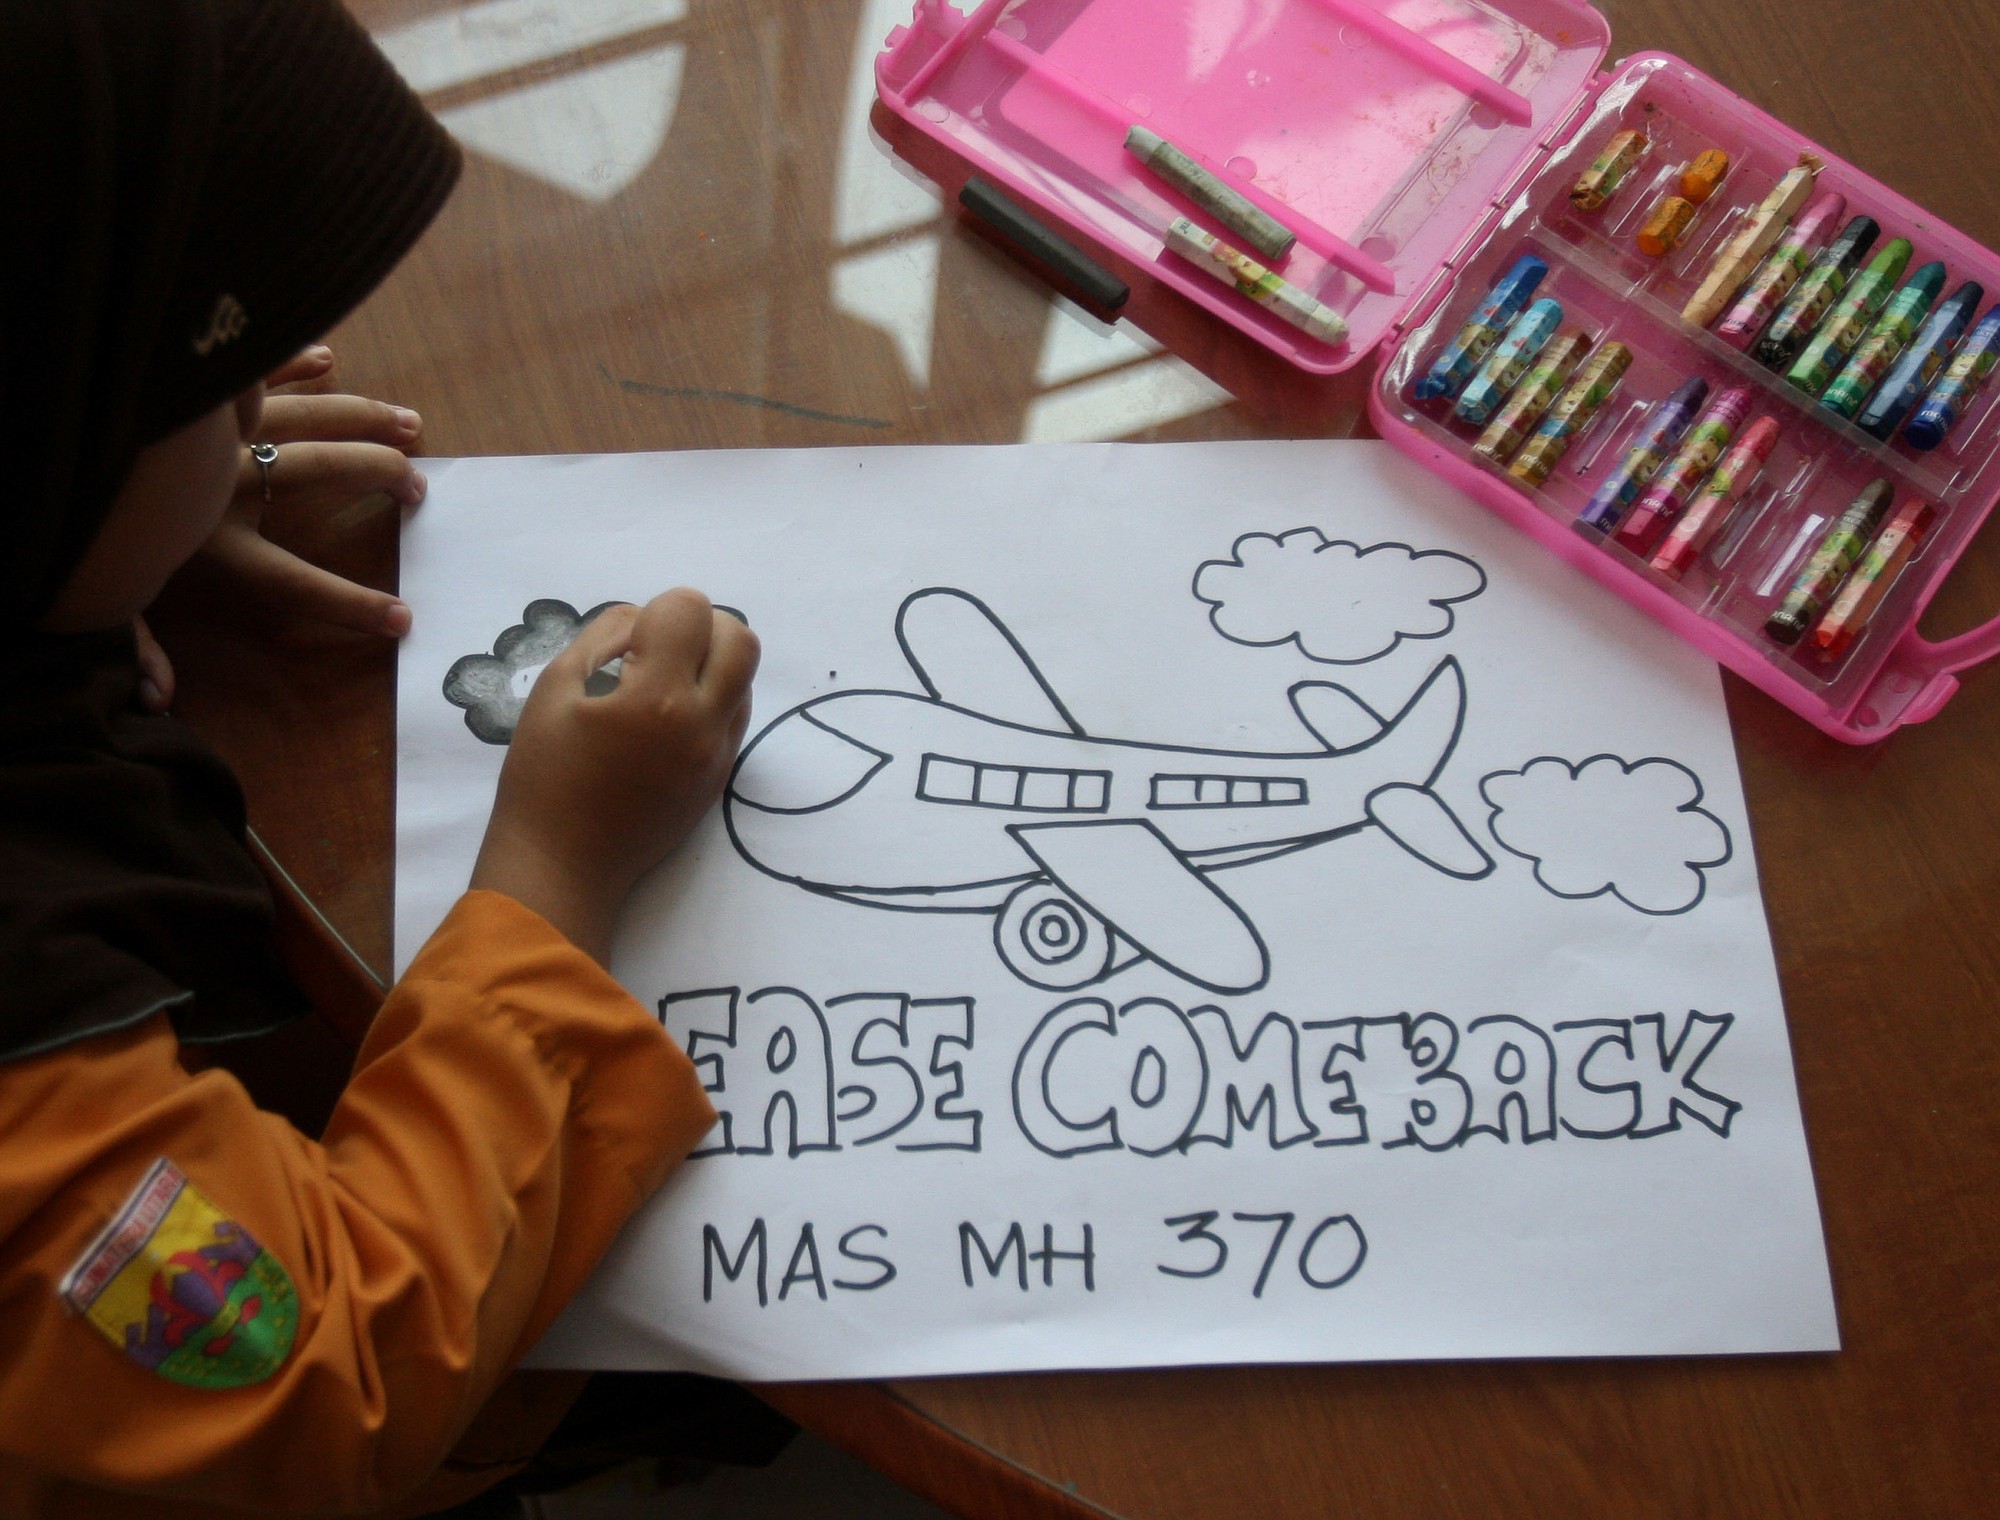 Syira Nazia Hutabarat, 8, works on a picture with for the missing Malaysia Airlines flight MH370 during a class at an elementary school in Medan, North Sumatra, Indonesia.